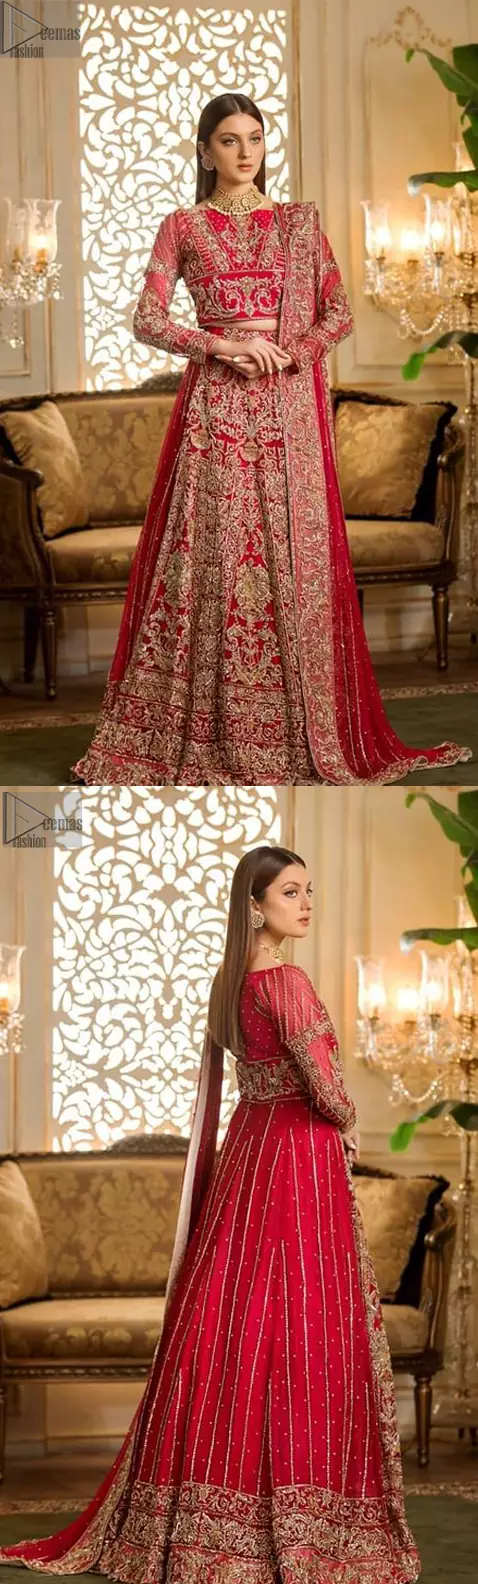 A unique jewel neckline contributes further to its worthiness, while the golden embroidery that the neckline follows speaks for its unparalleled charm and glory. On your reception day, let your persona flourish with the Red Lehenga Blouse, exquisite bridal wear made with the utmost supremacy. 
